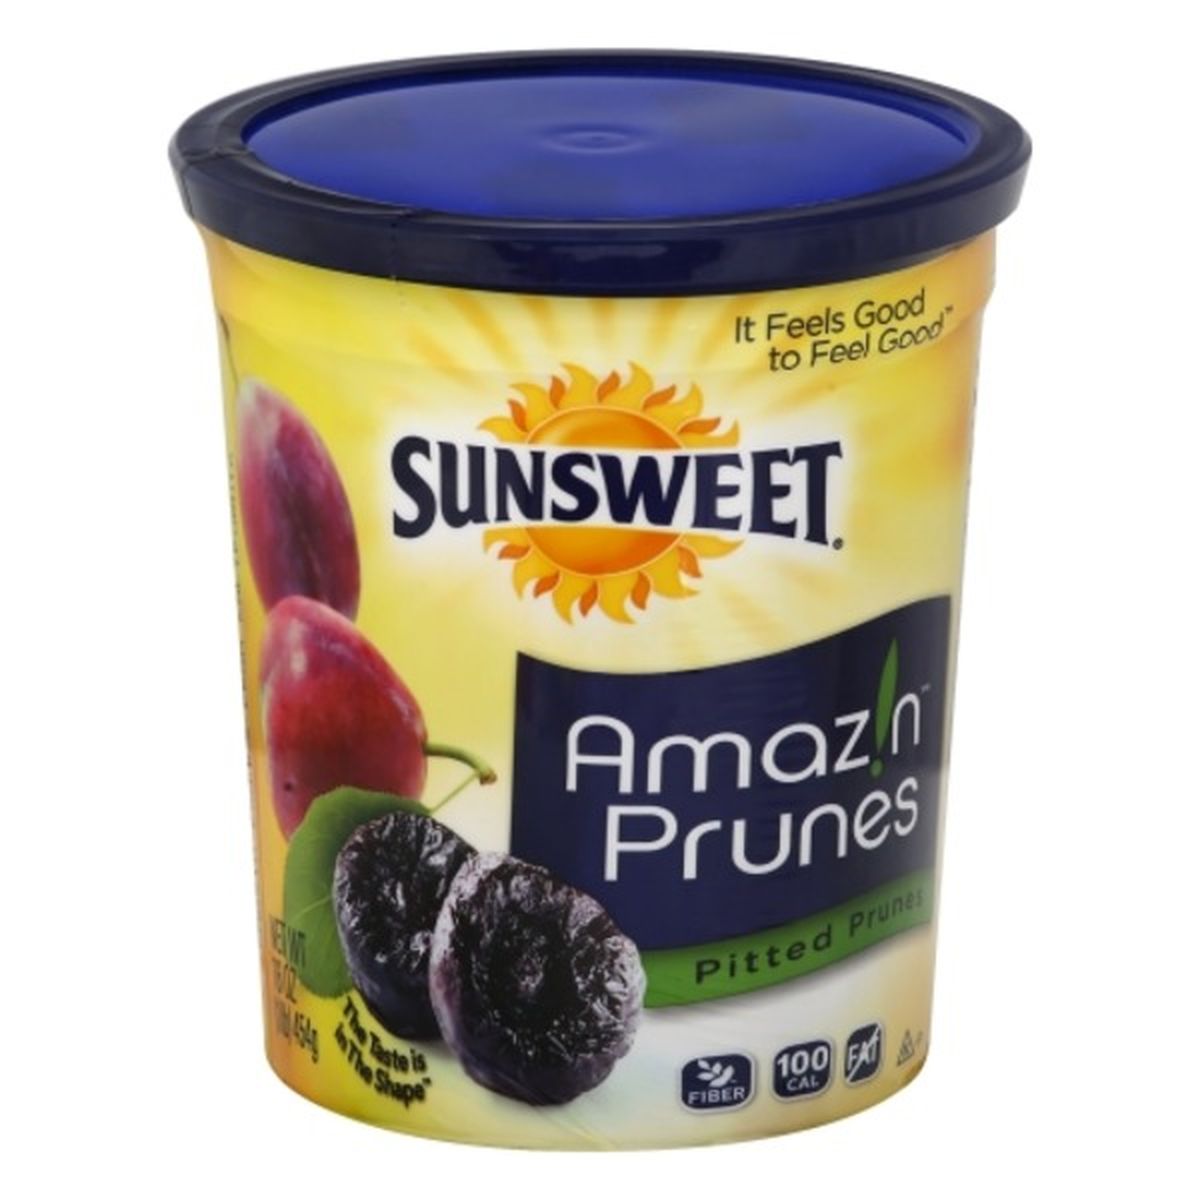 Calories in Sunsweet Amazin Prunes, Pitted